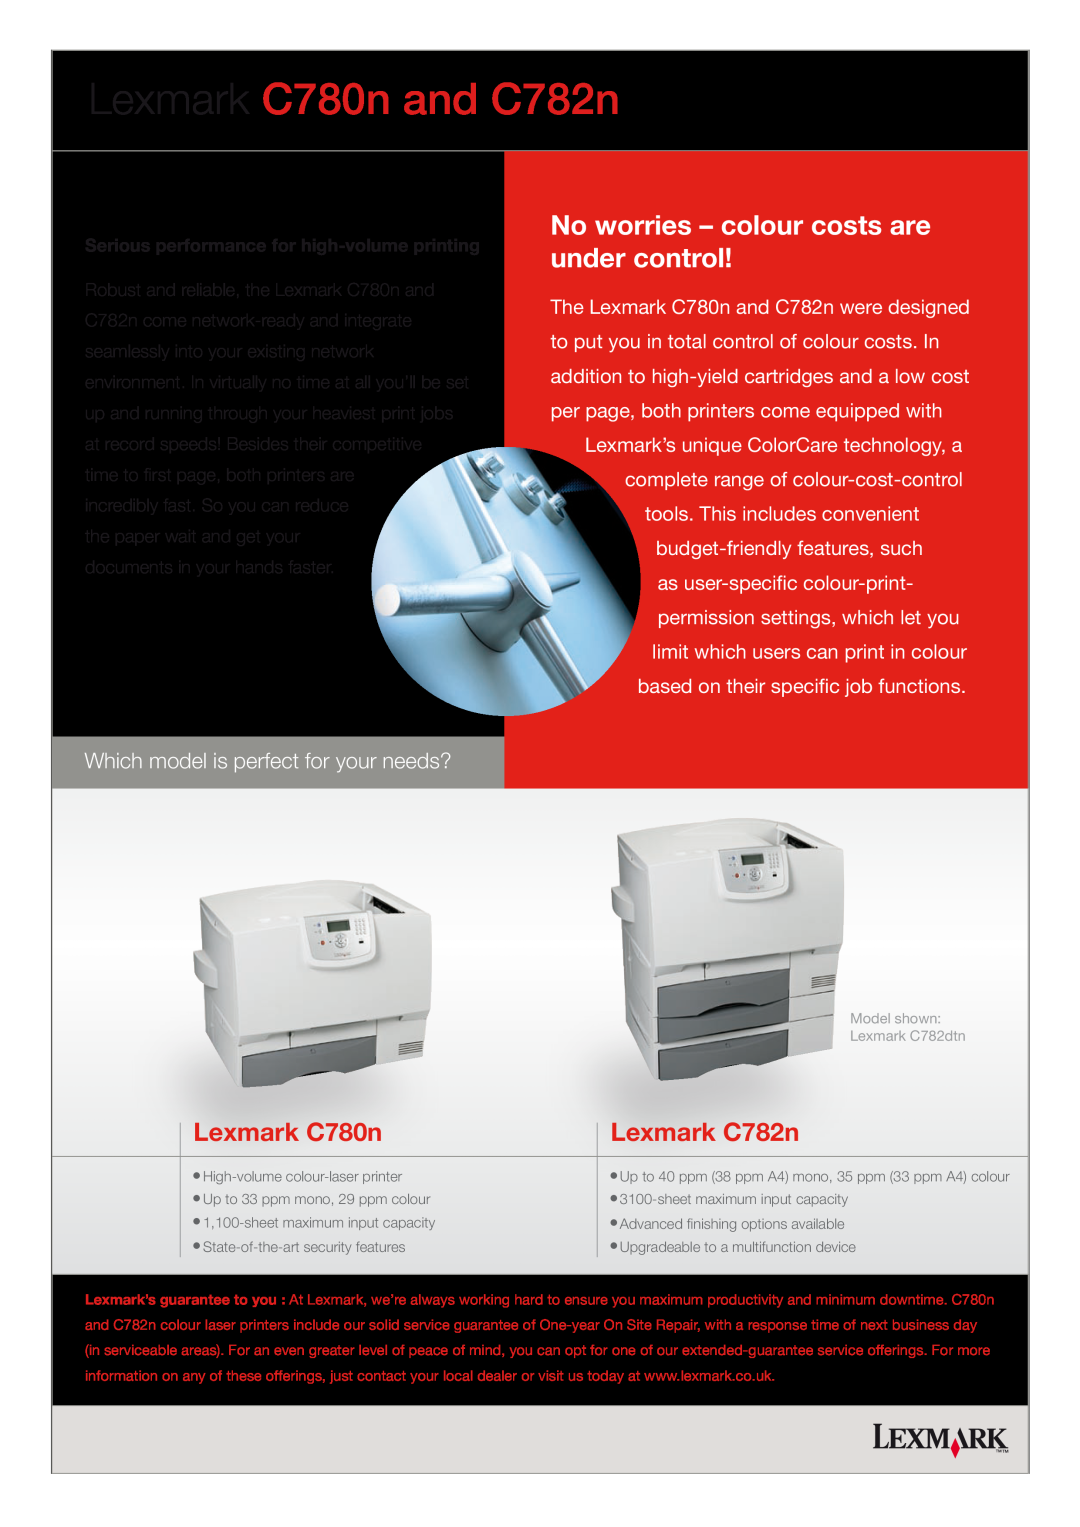 Lexmark manual No worries - colour costs are under control, Lexmark C780n and C782n, Lexmark C782n 